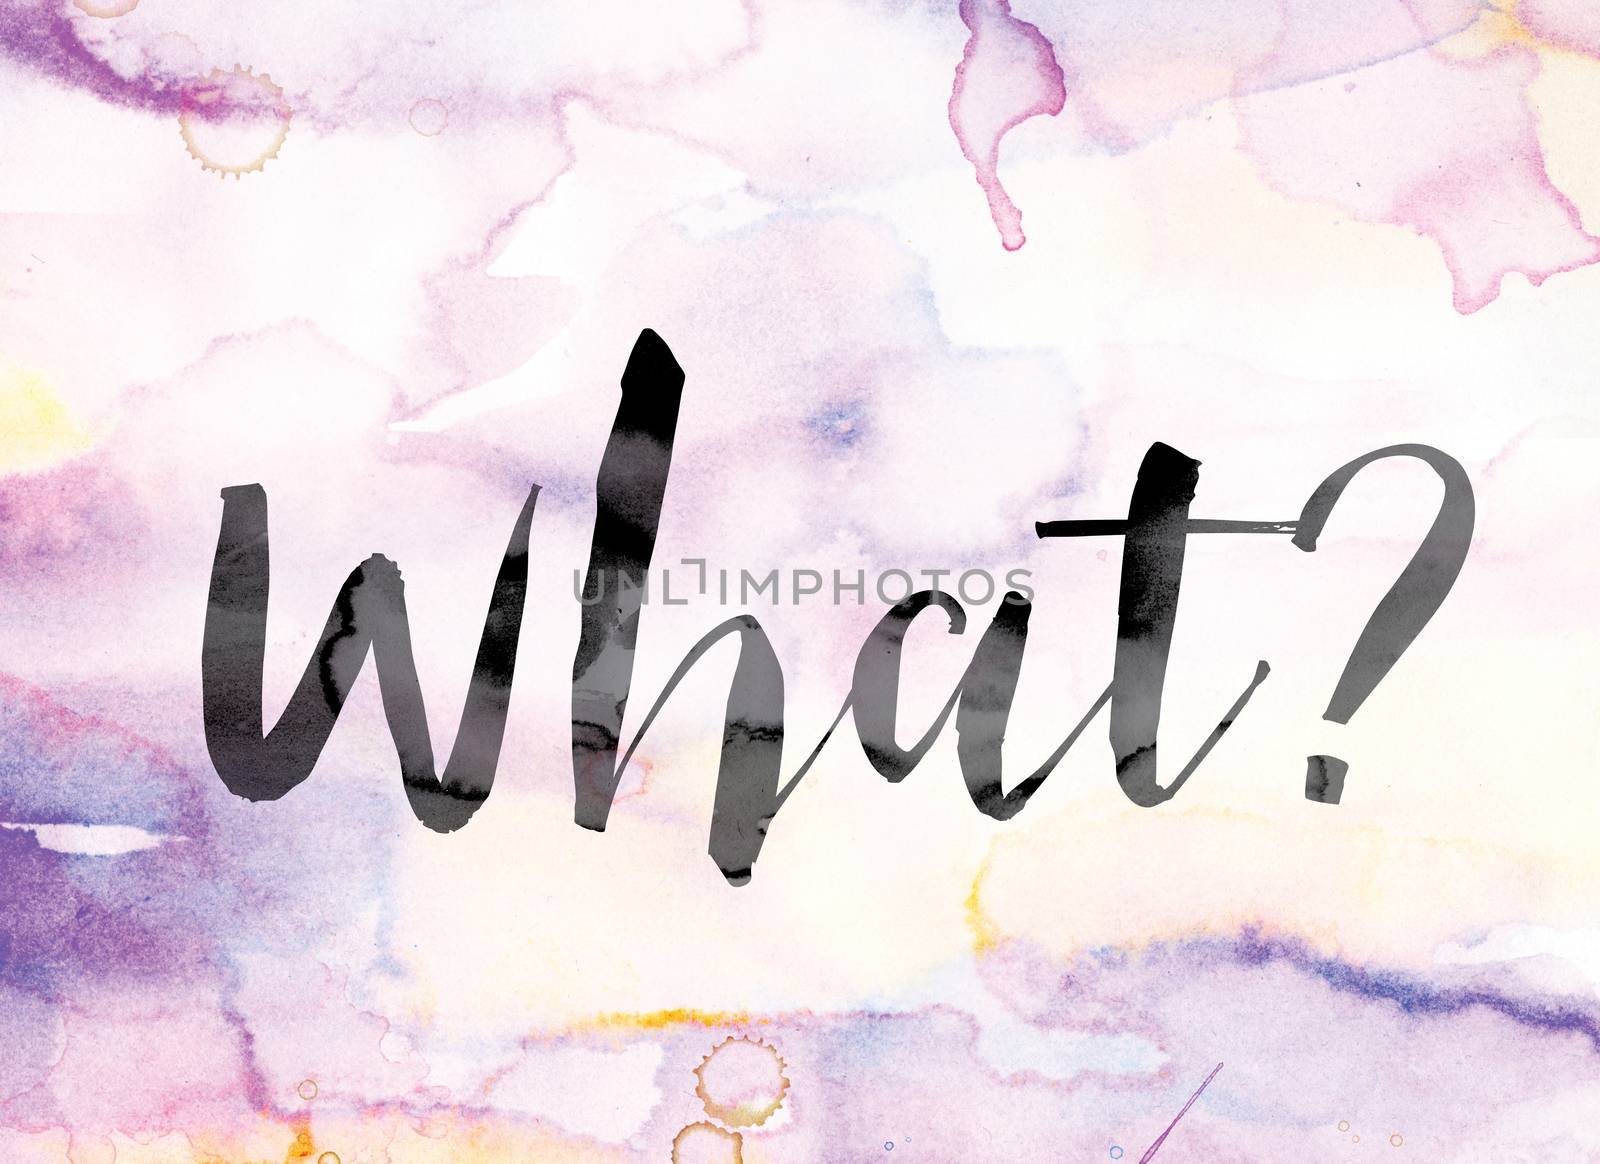 The word "What" painted in black ink over a colorful watercolor washed background concept and theme.